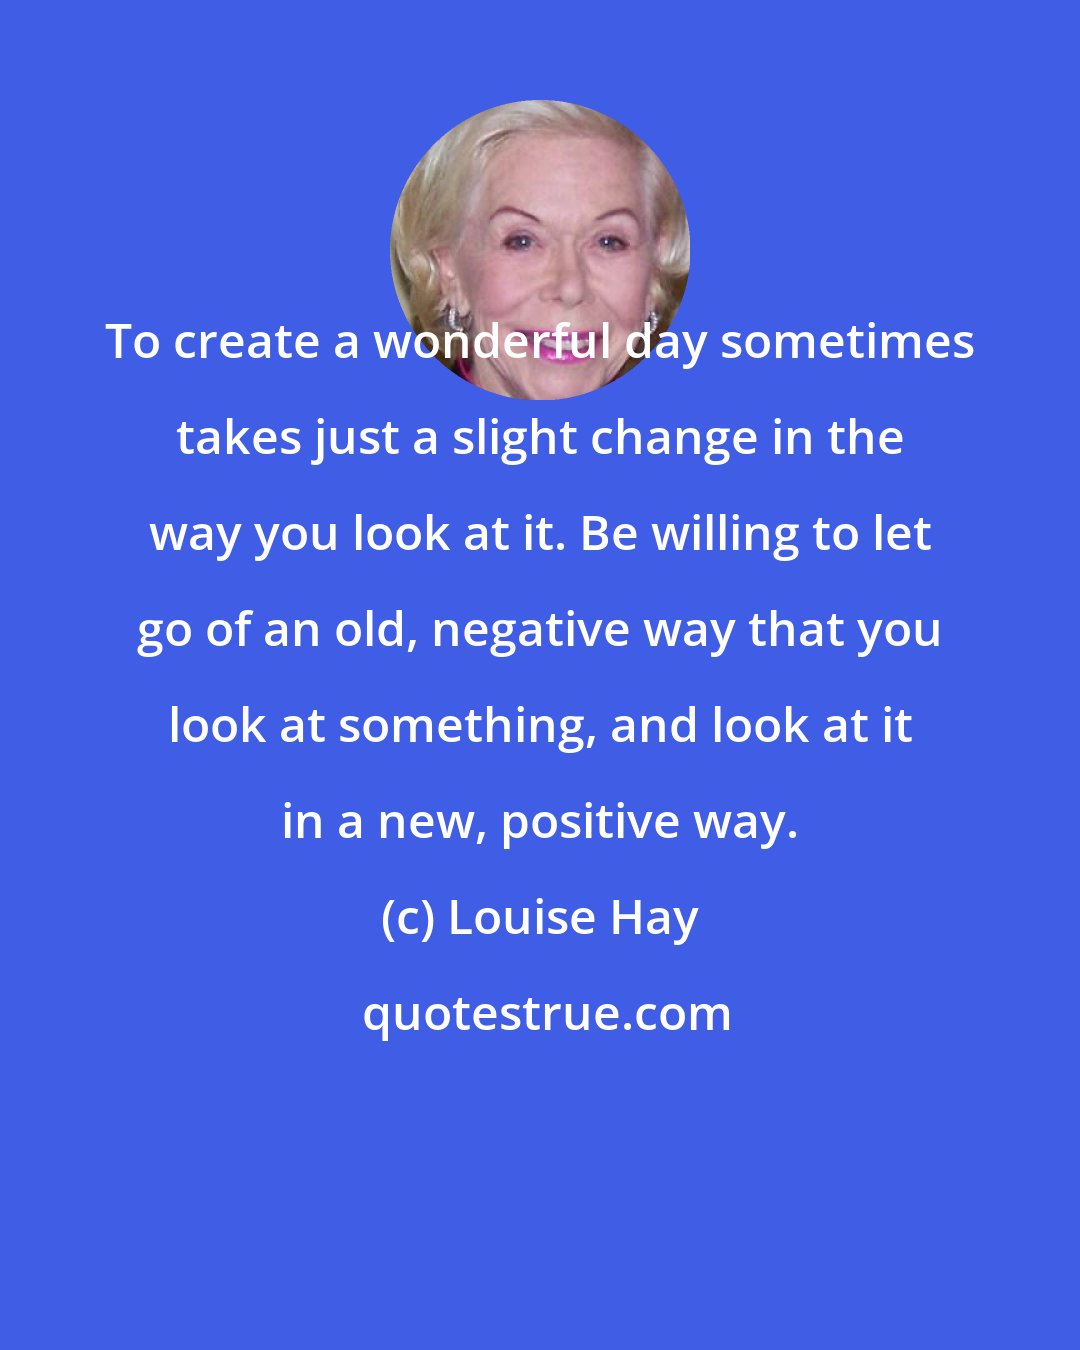 Louise Hay: To create a wonderful day sometimes takes just a slight change in the way you look at it. Be willing to let go of an old, negative way that you look at something, and look at it in a new, positive way.